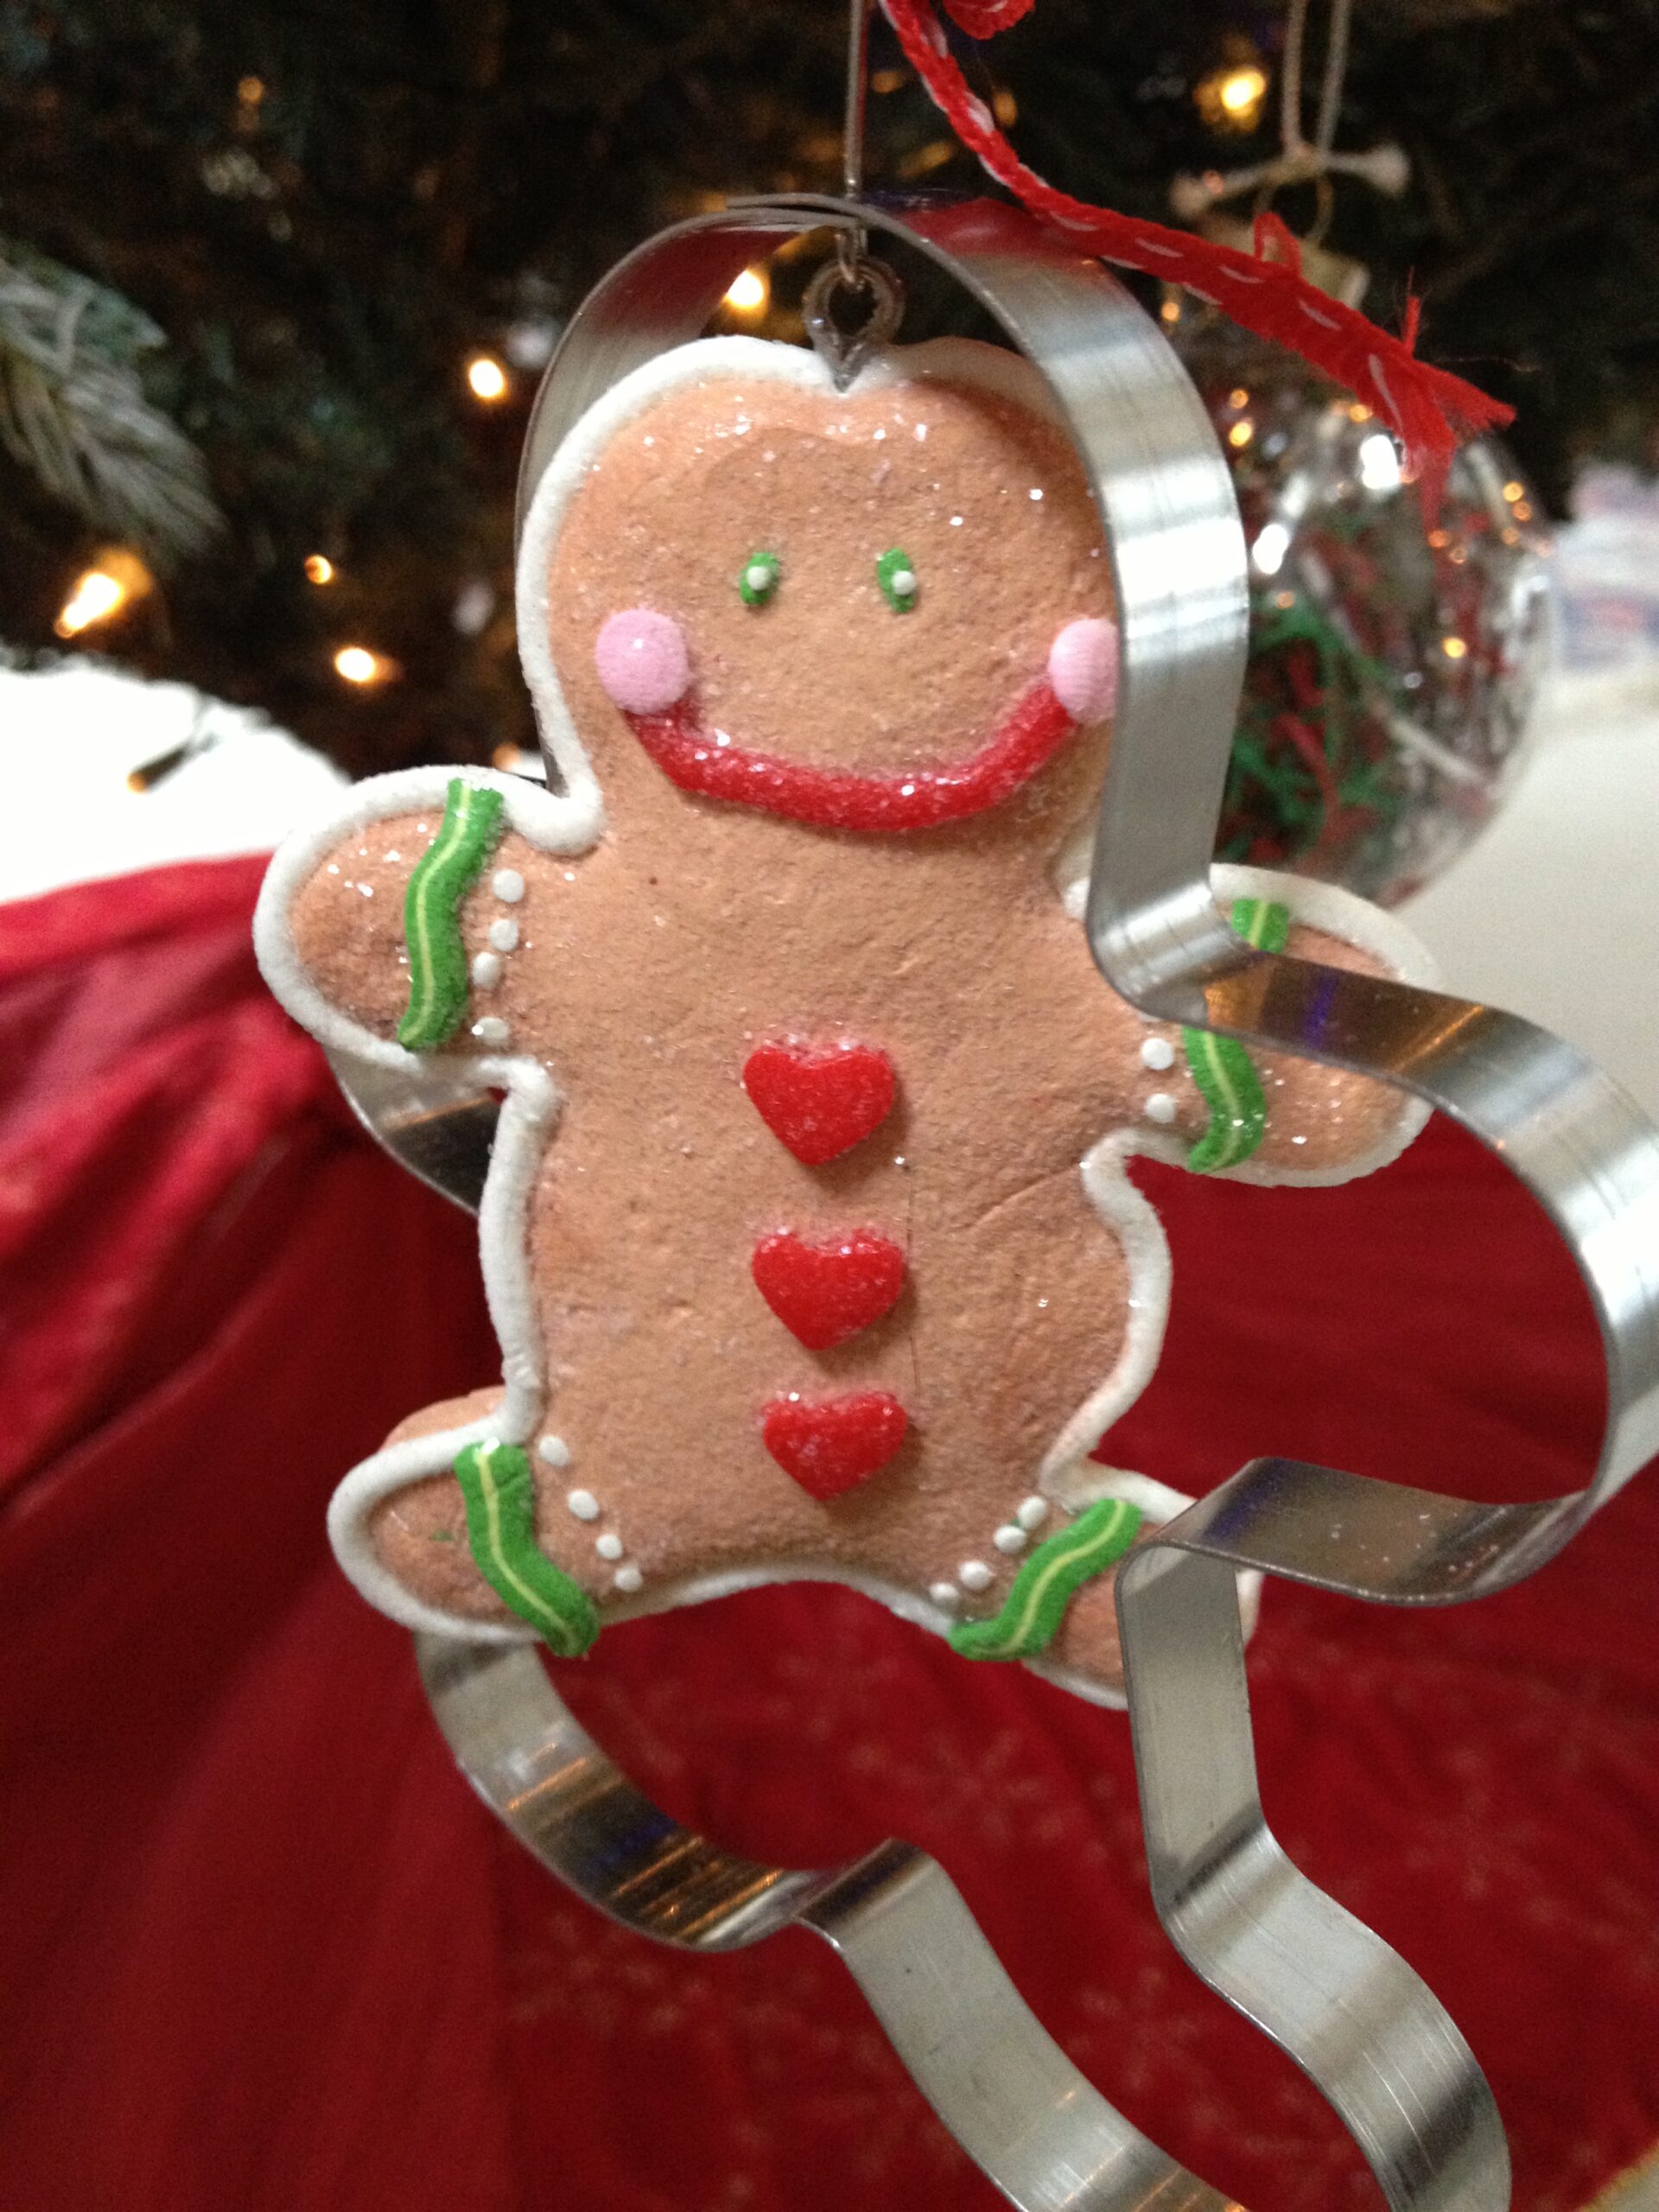 A gingerbread man ornament appears to be running away from the cookie cutter